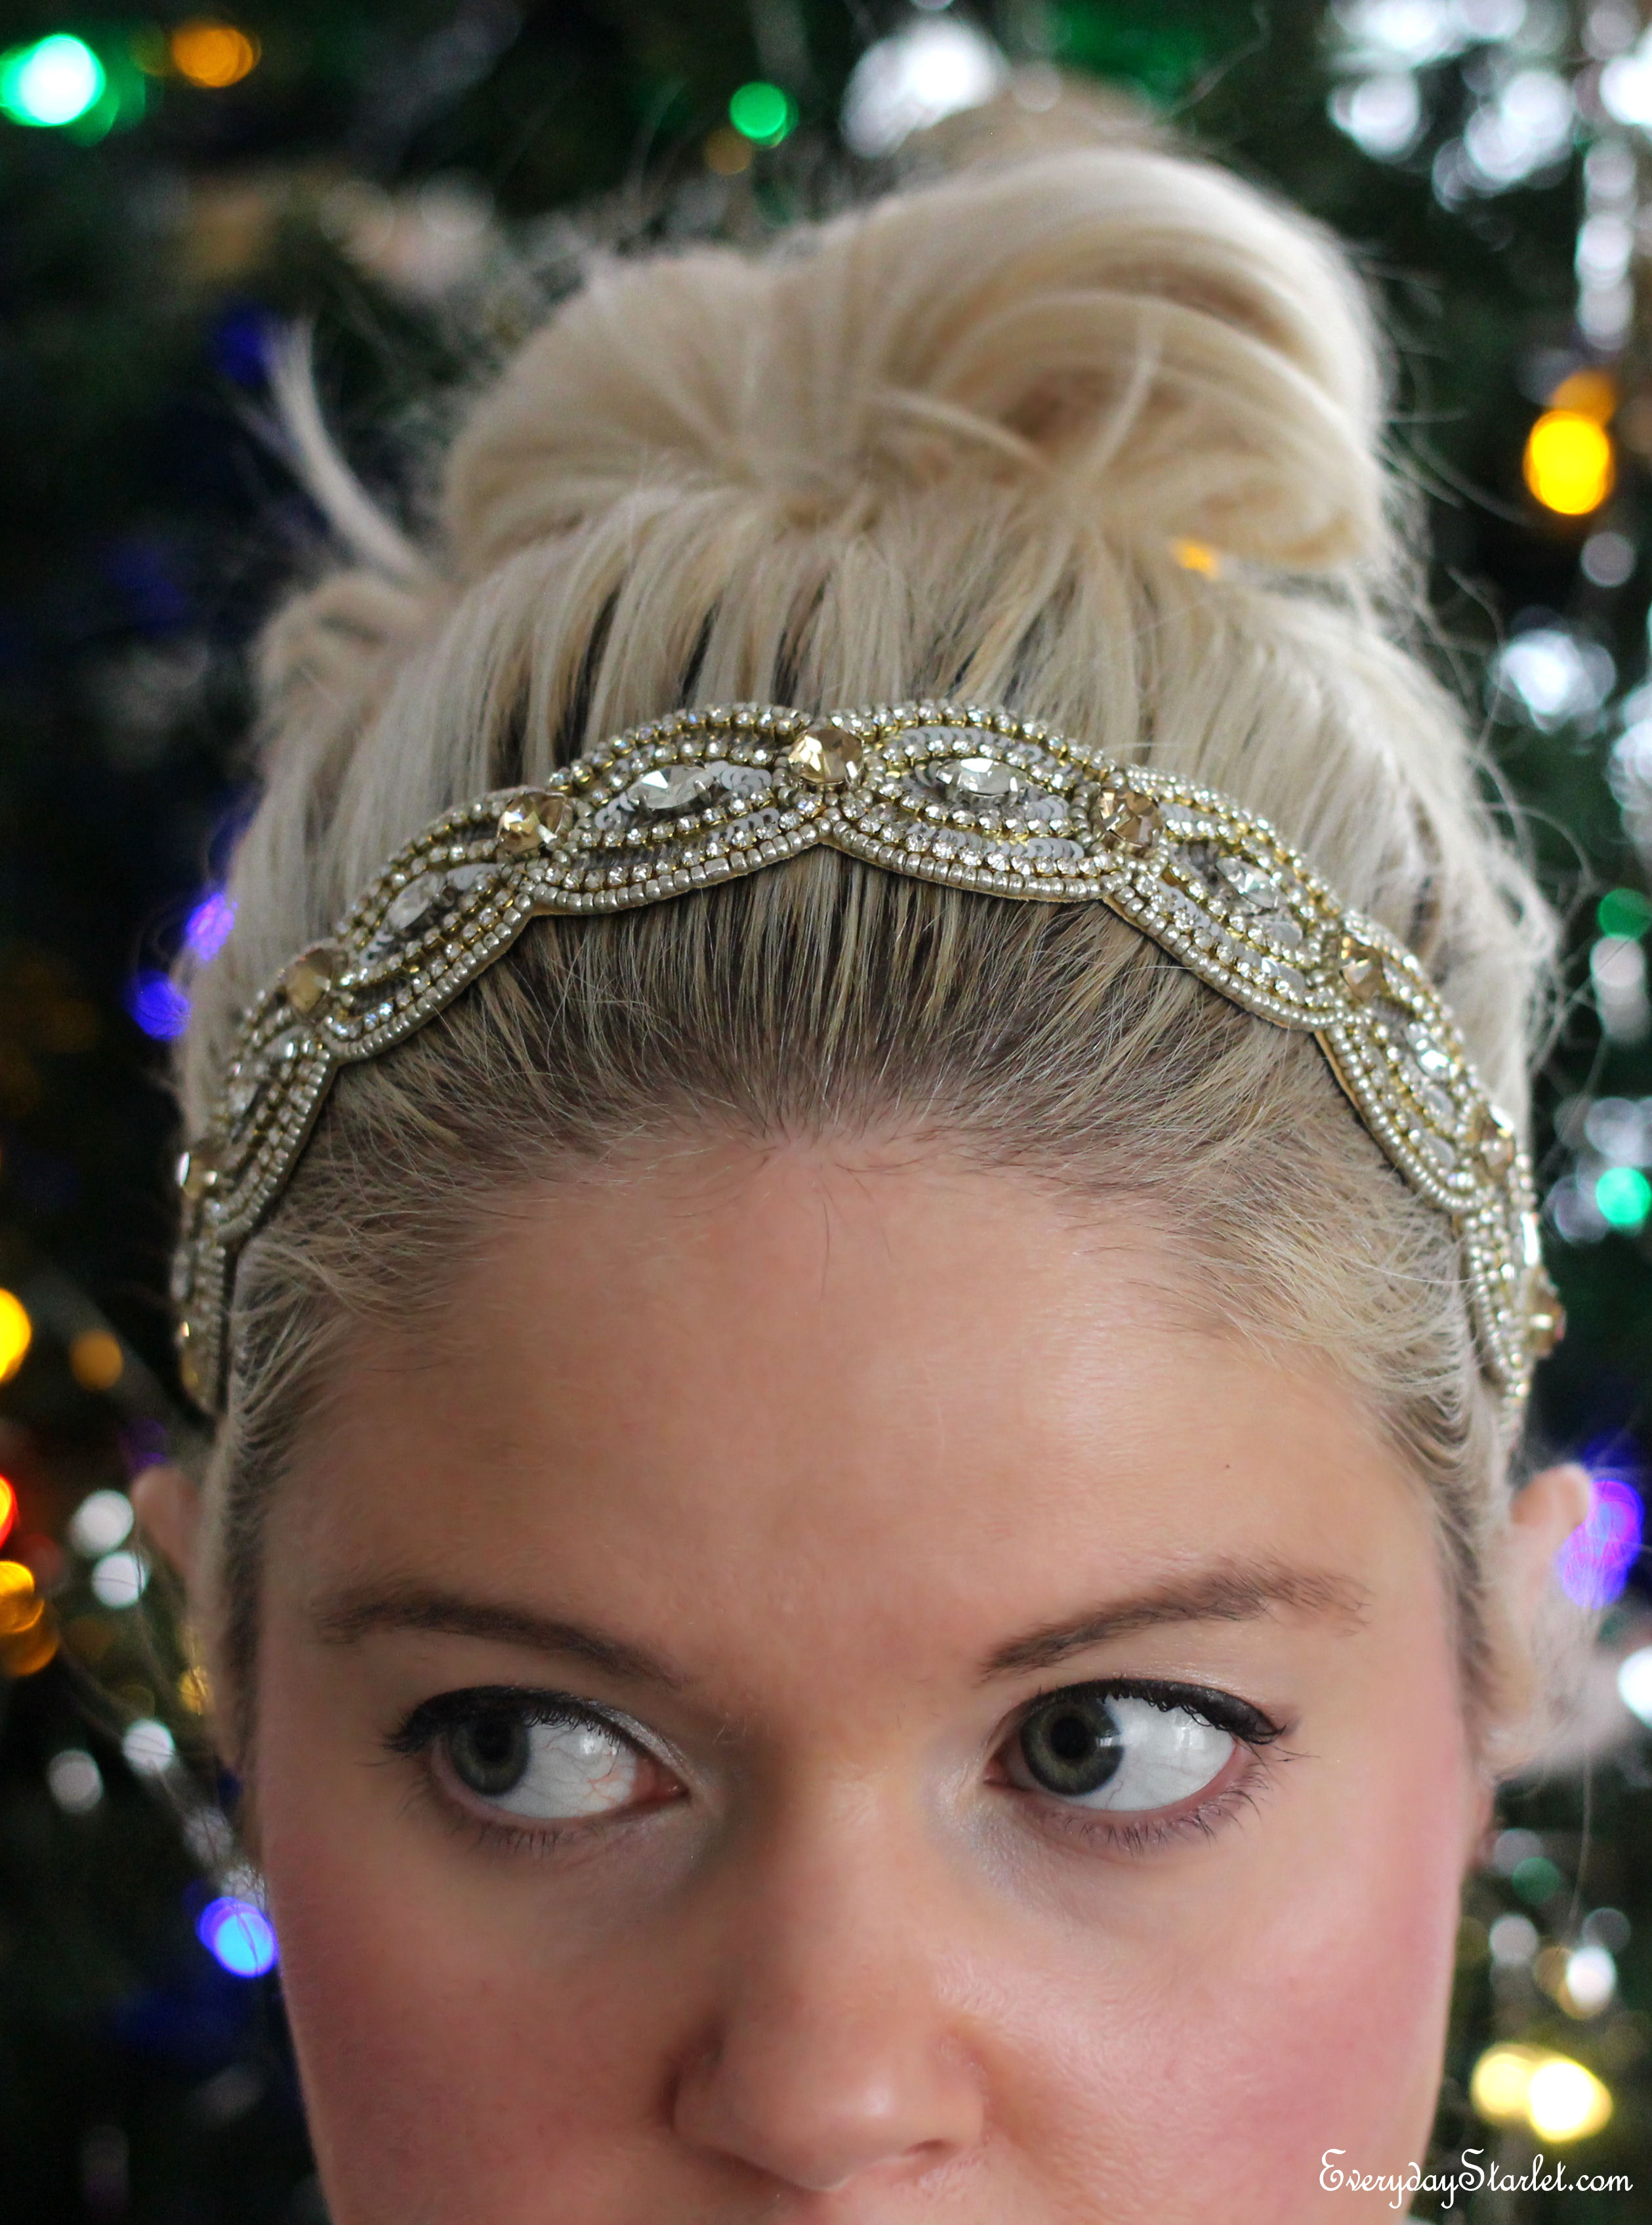 How to Look Festive This Christmas Without Looking Tacky